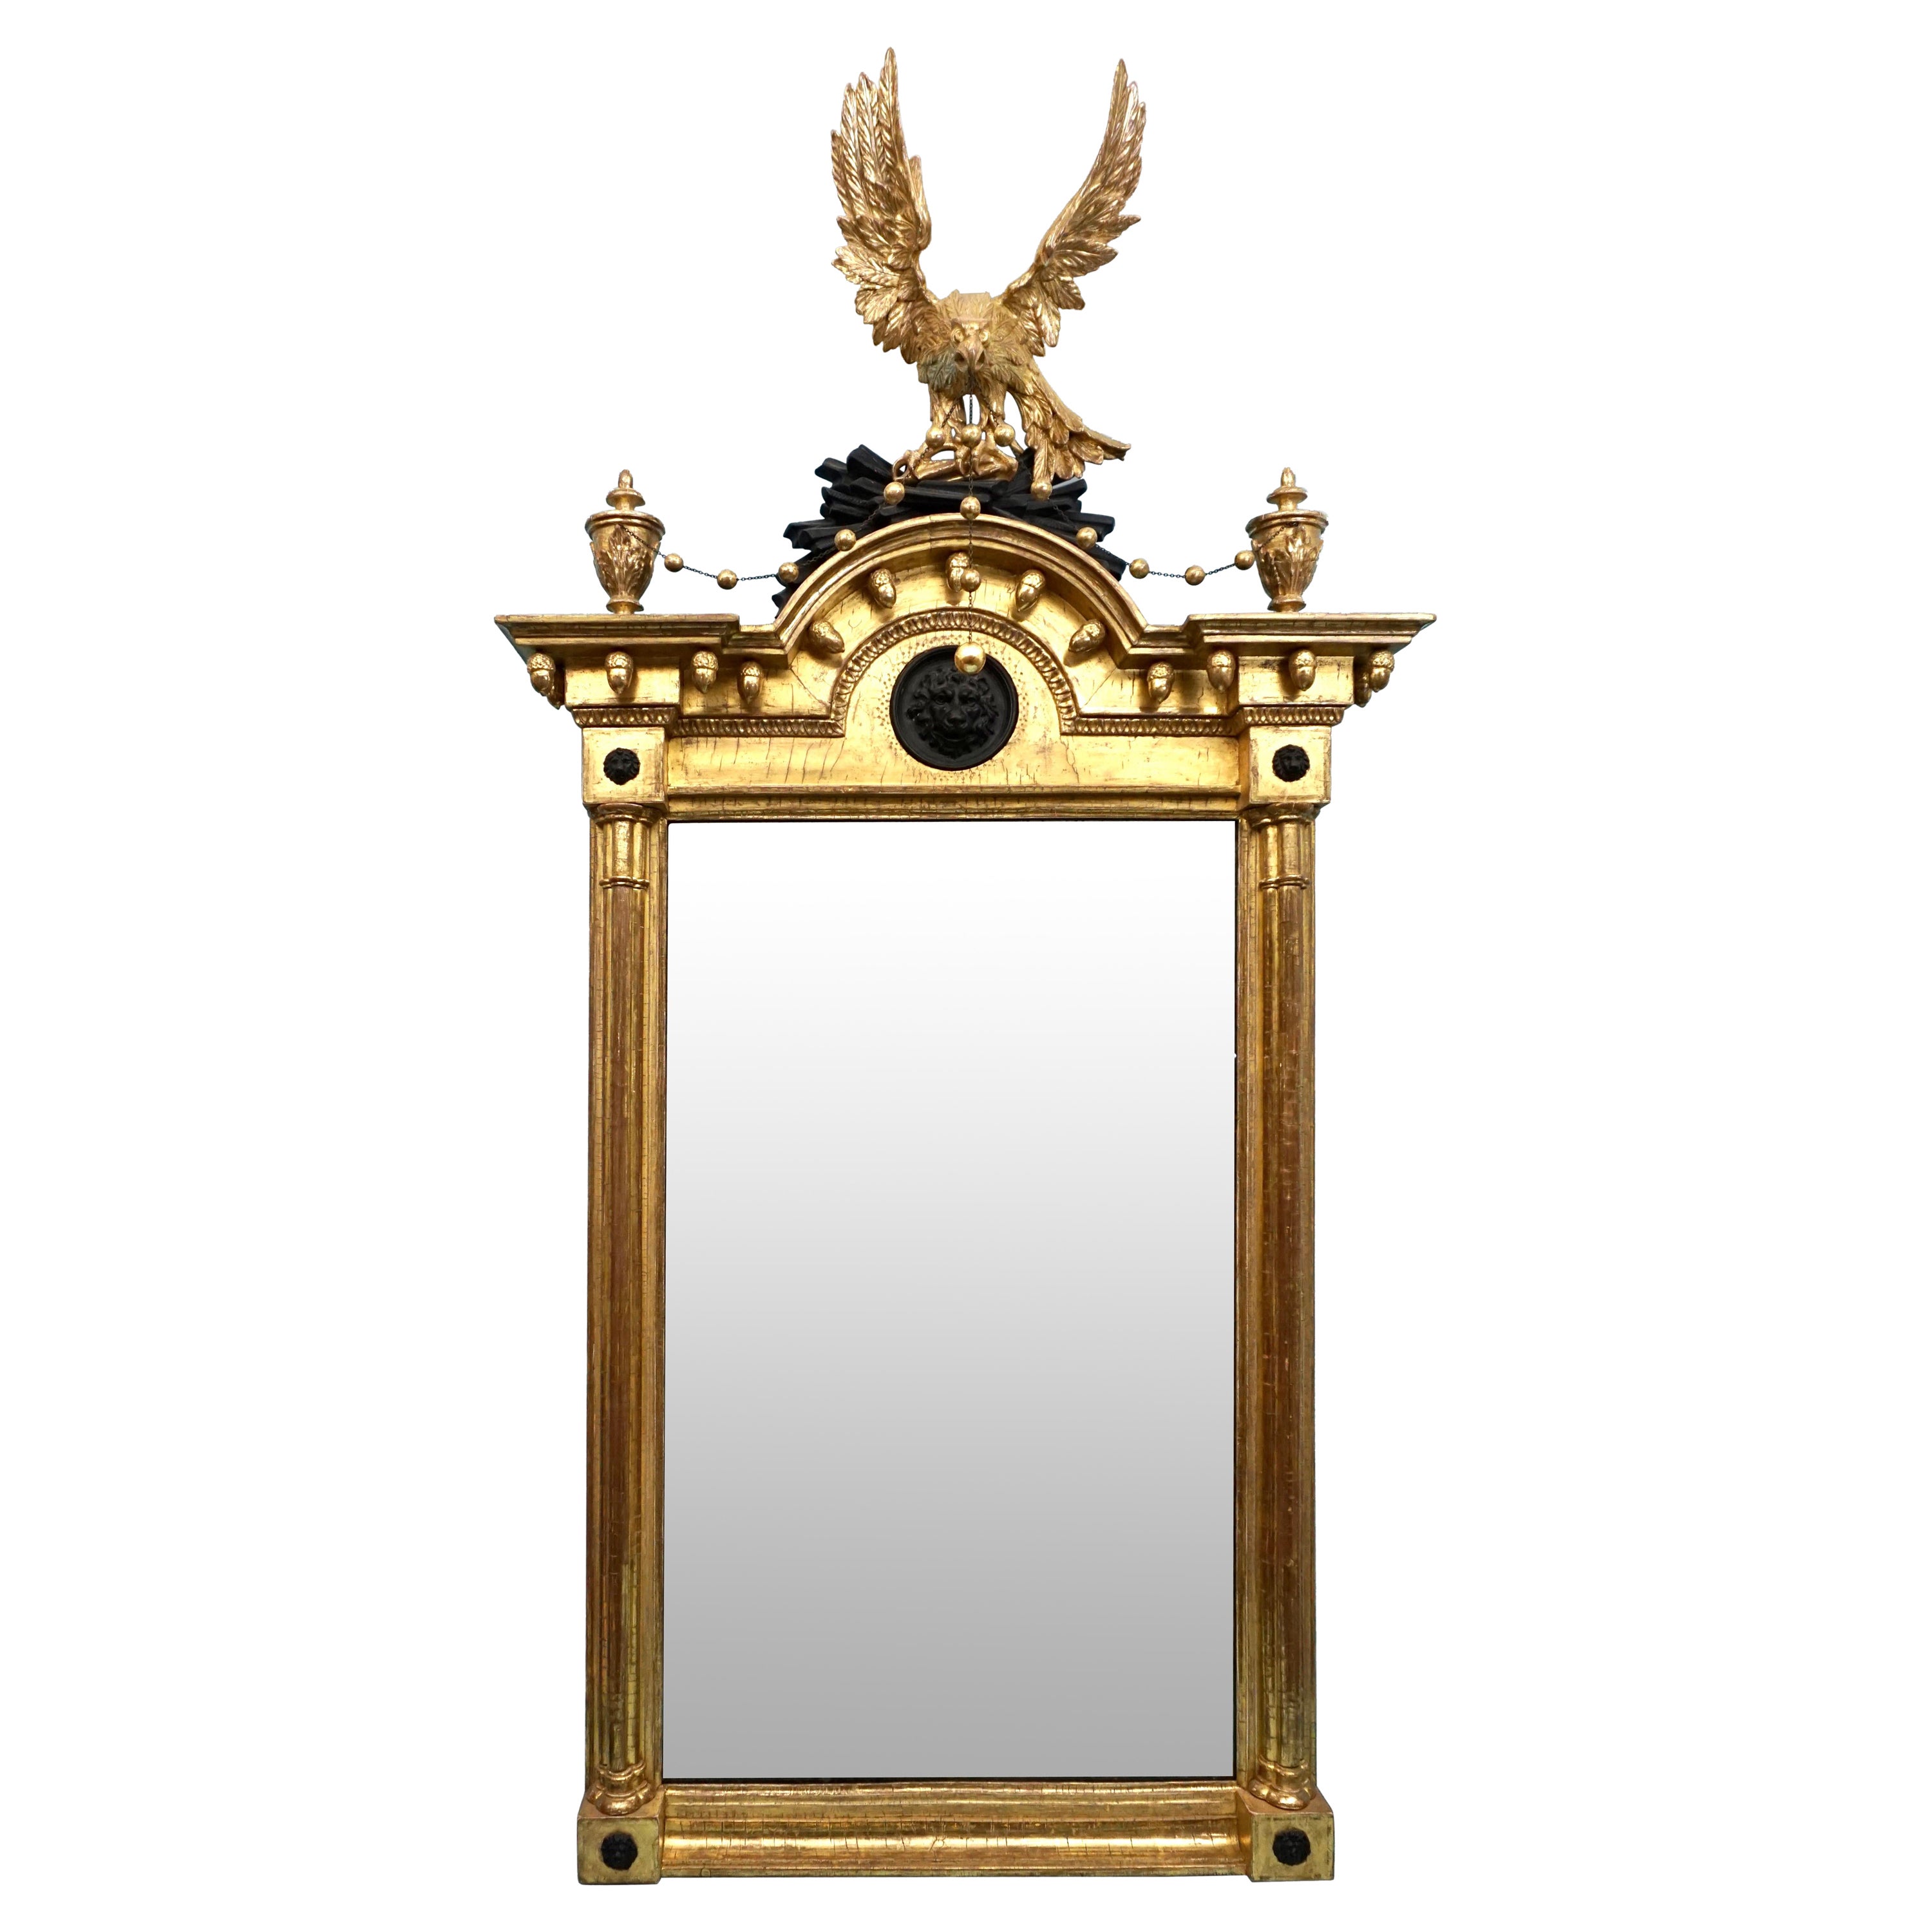 Fine Regency Giltwood Mirror with Carved Eagle Cresting and Lion's Mask Bosses